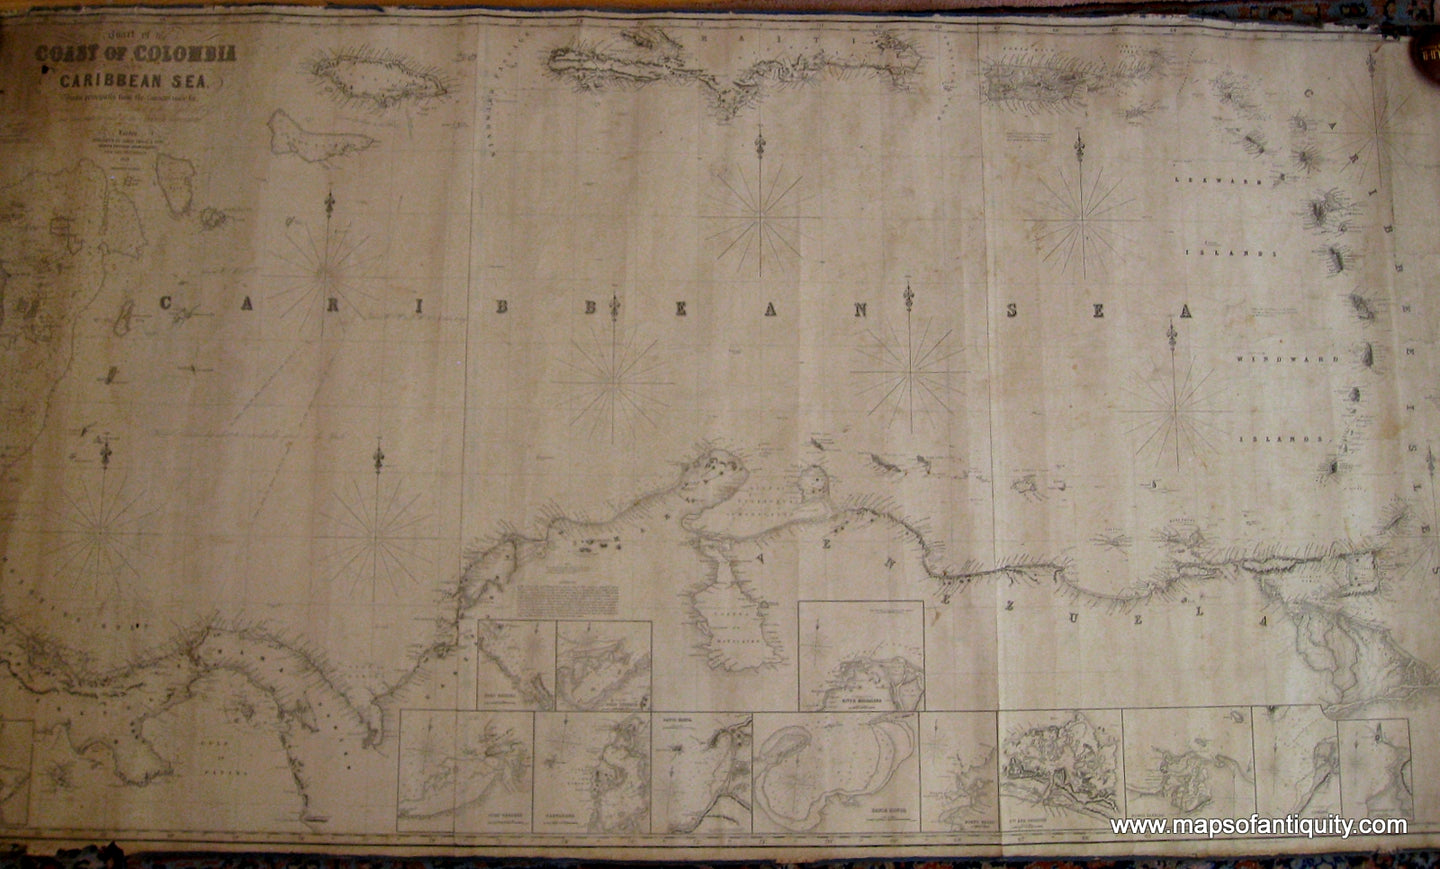 Antique-Blue-Back-Nautical-Chart-Imray-Chart-of-the-Coast-of-Colombia-and-the-Caribbean-Sea.**********-Nautical-Gifts-1853-Imray-Maps-Of-Antiquity